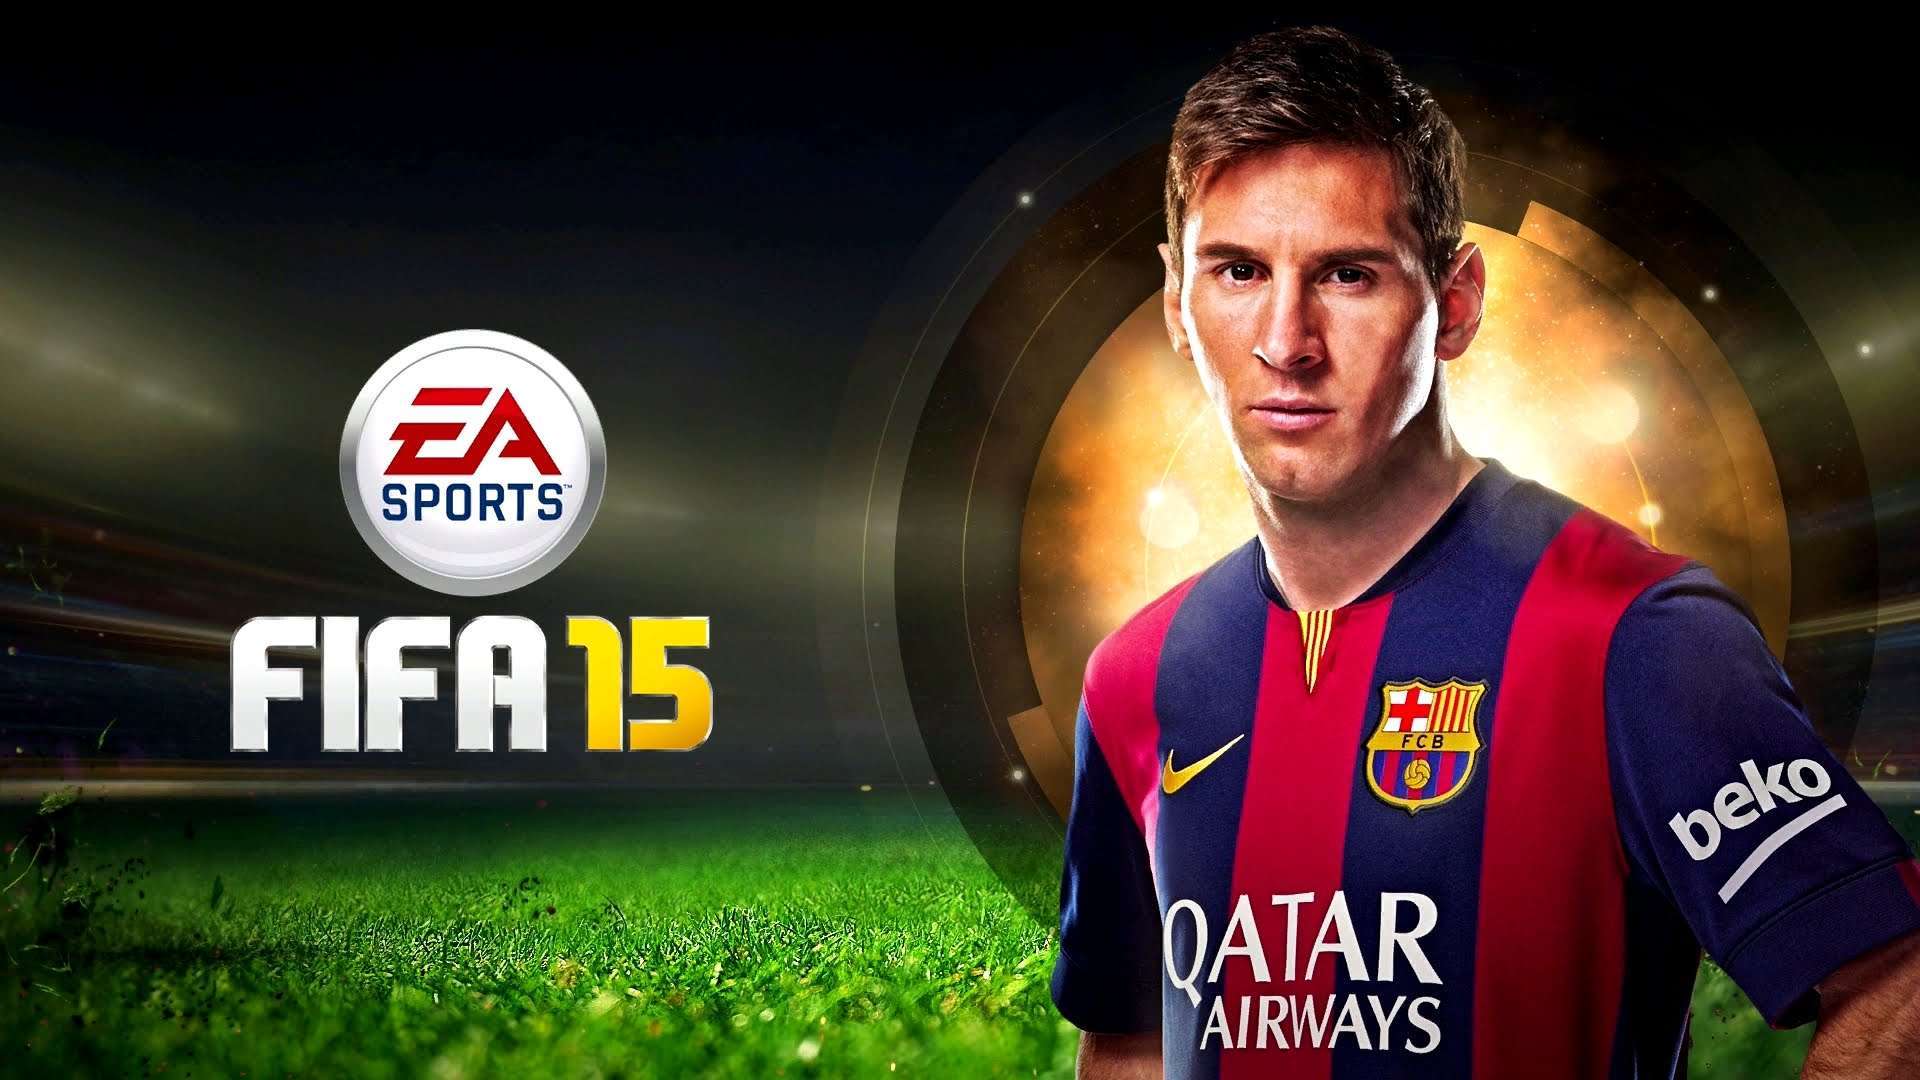 FIFA 15 High Quality #SKJ81 (Mobile And Desktop) WP Gallery